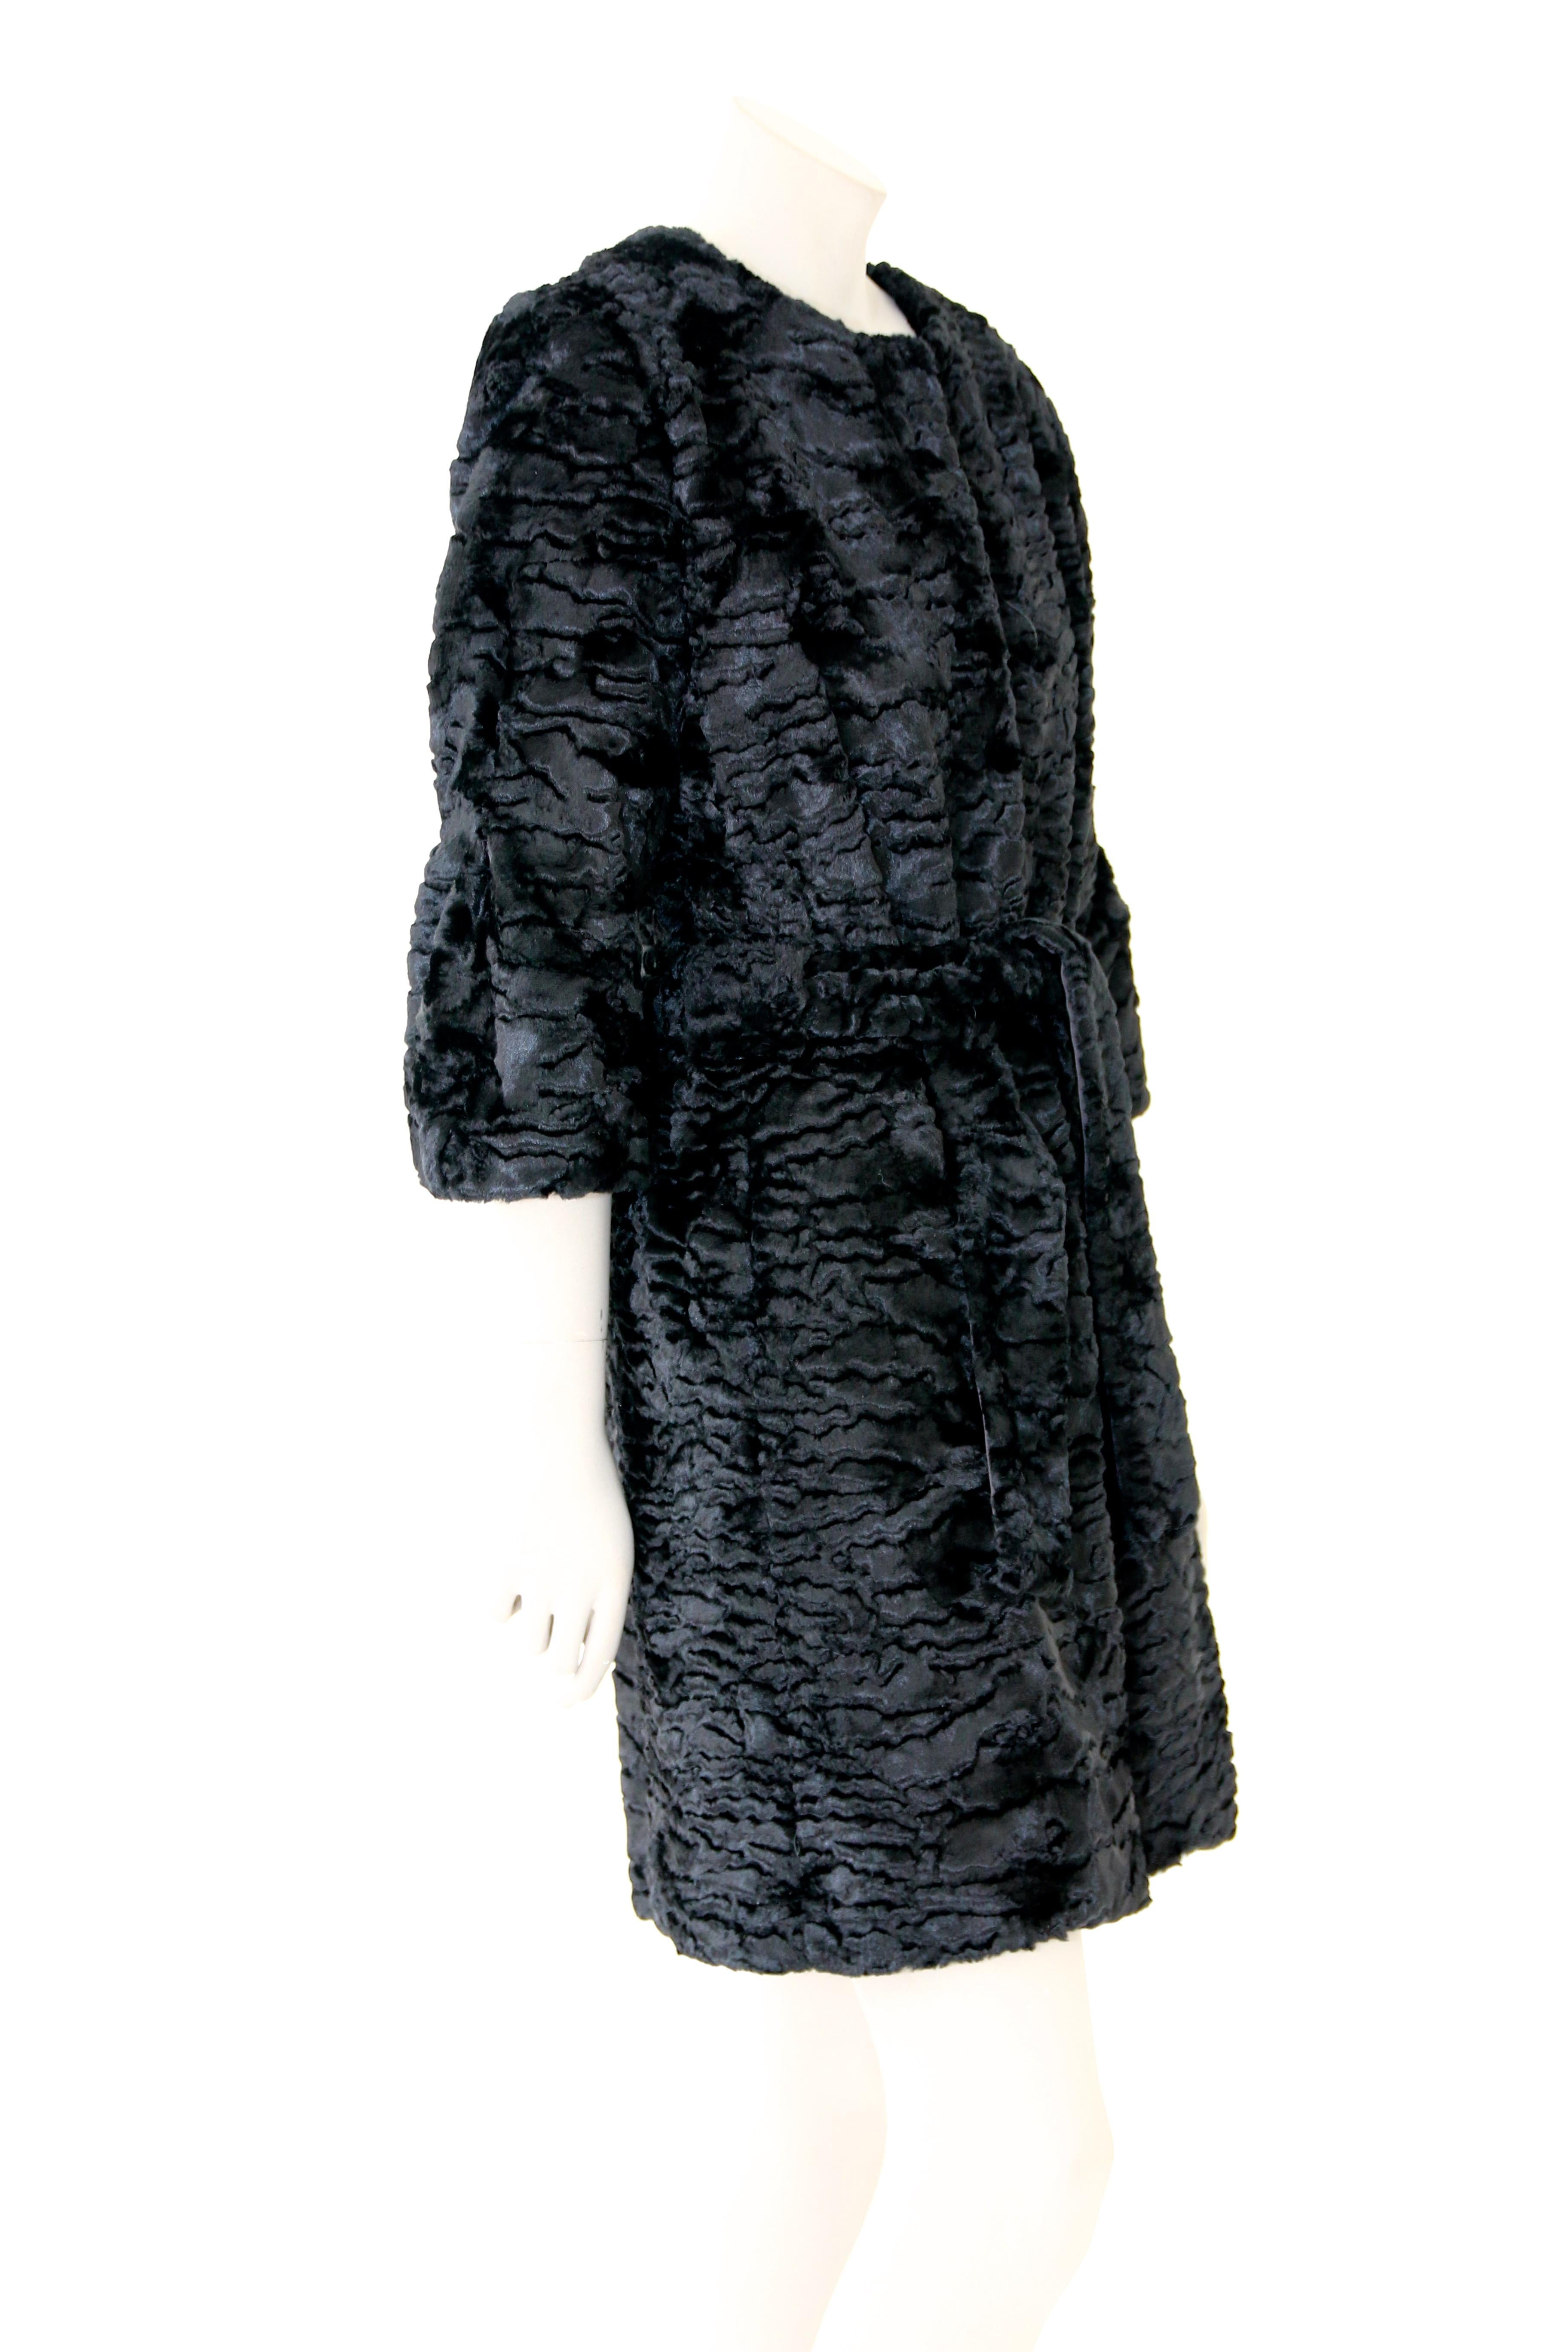 Pelush Black Astrakhan Faux Fur Coat With Belt - Small -  (1/M Available) For Sale 2